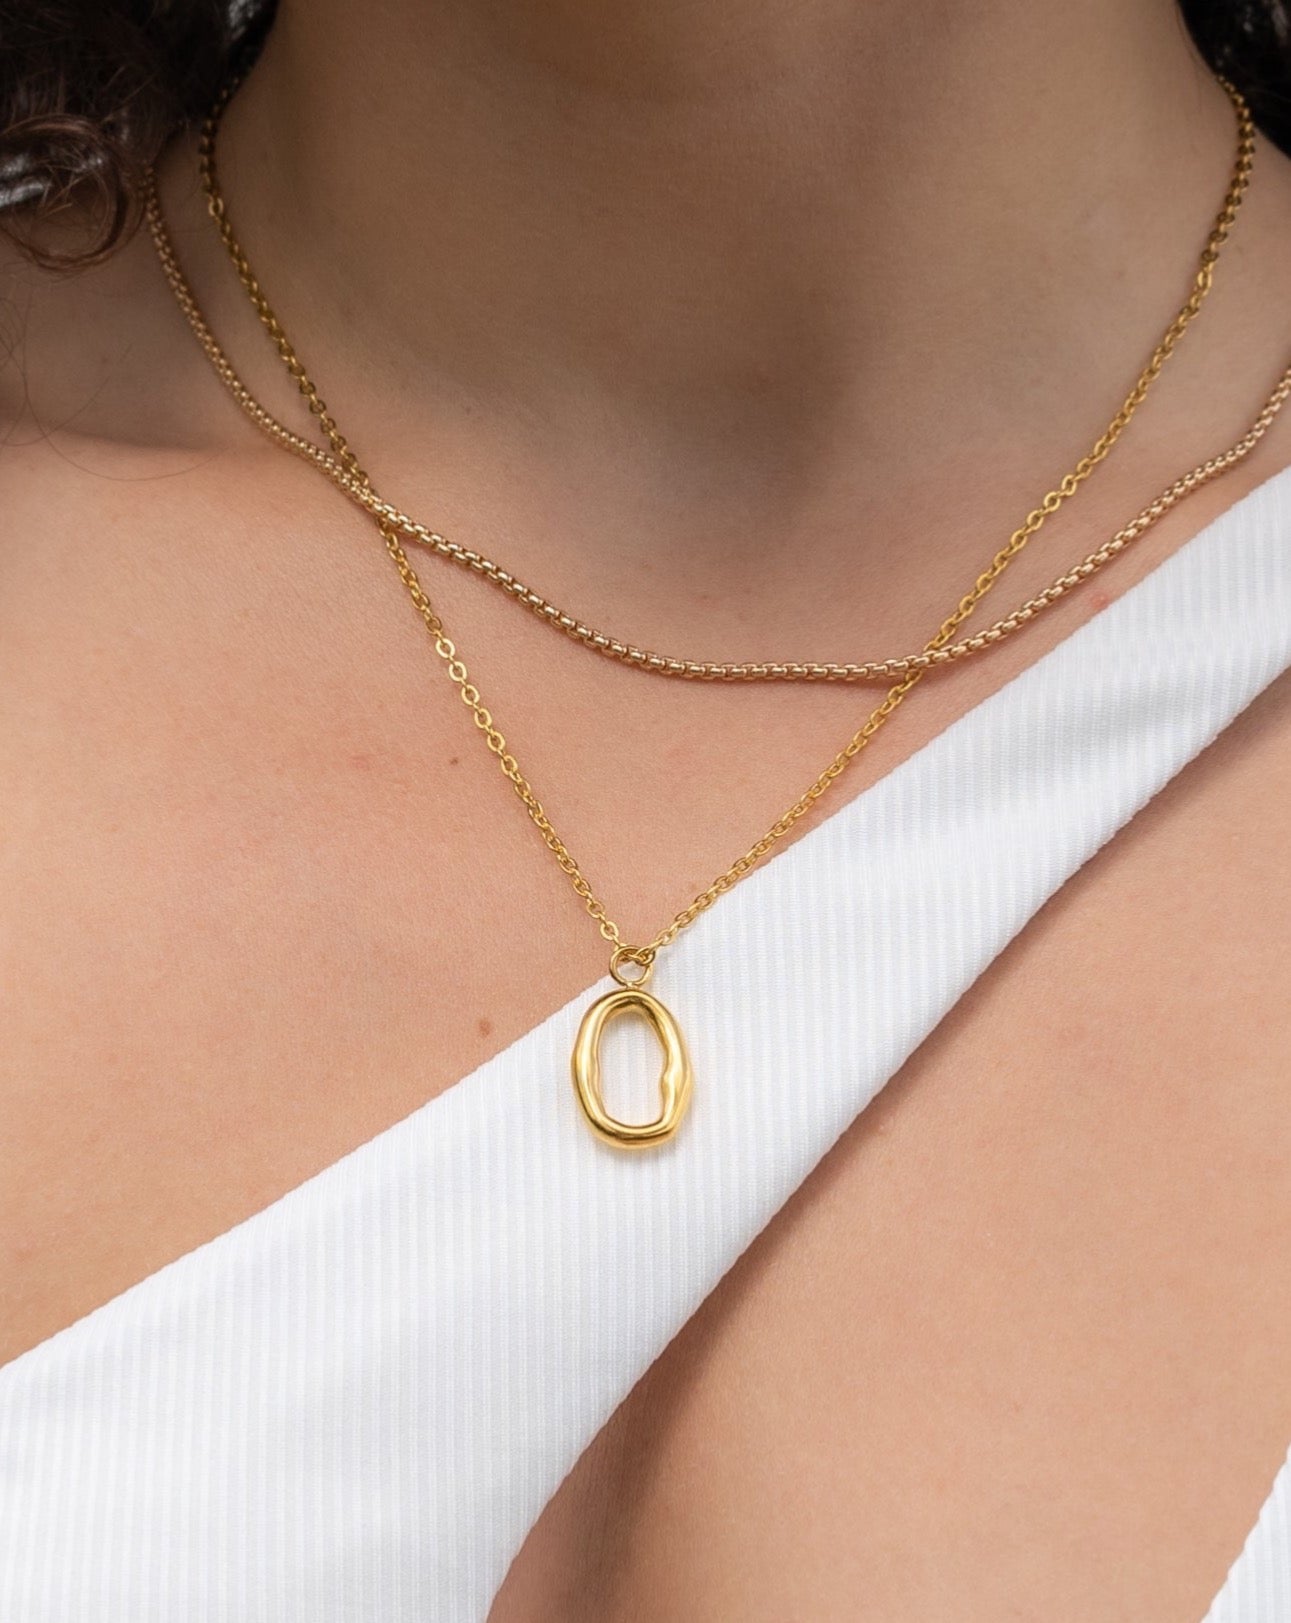 OVAL NECKLACE - DE.FINE Collection Jewelry